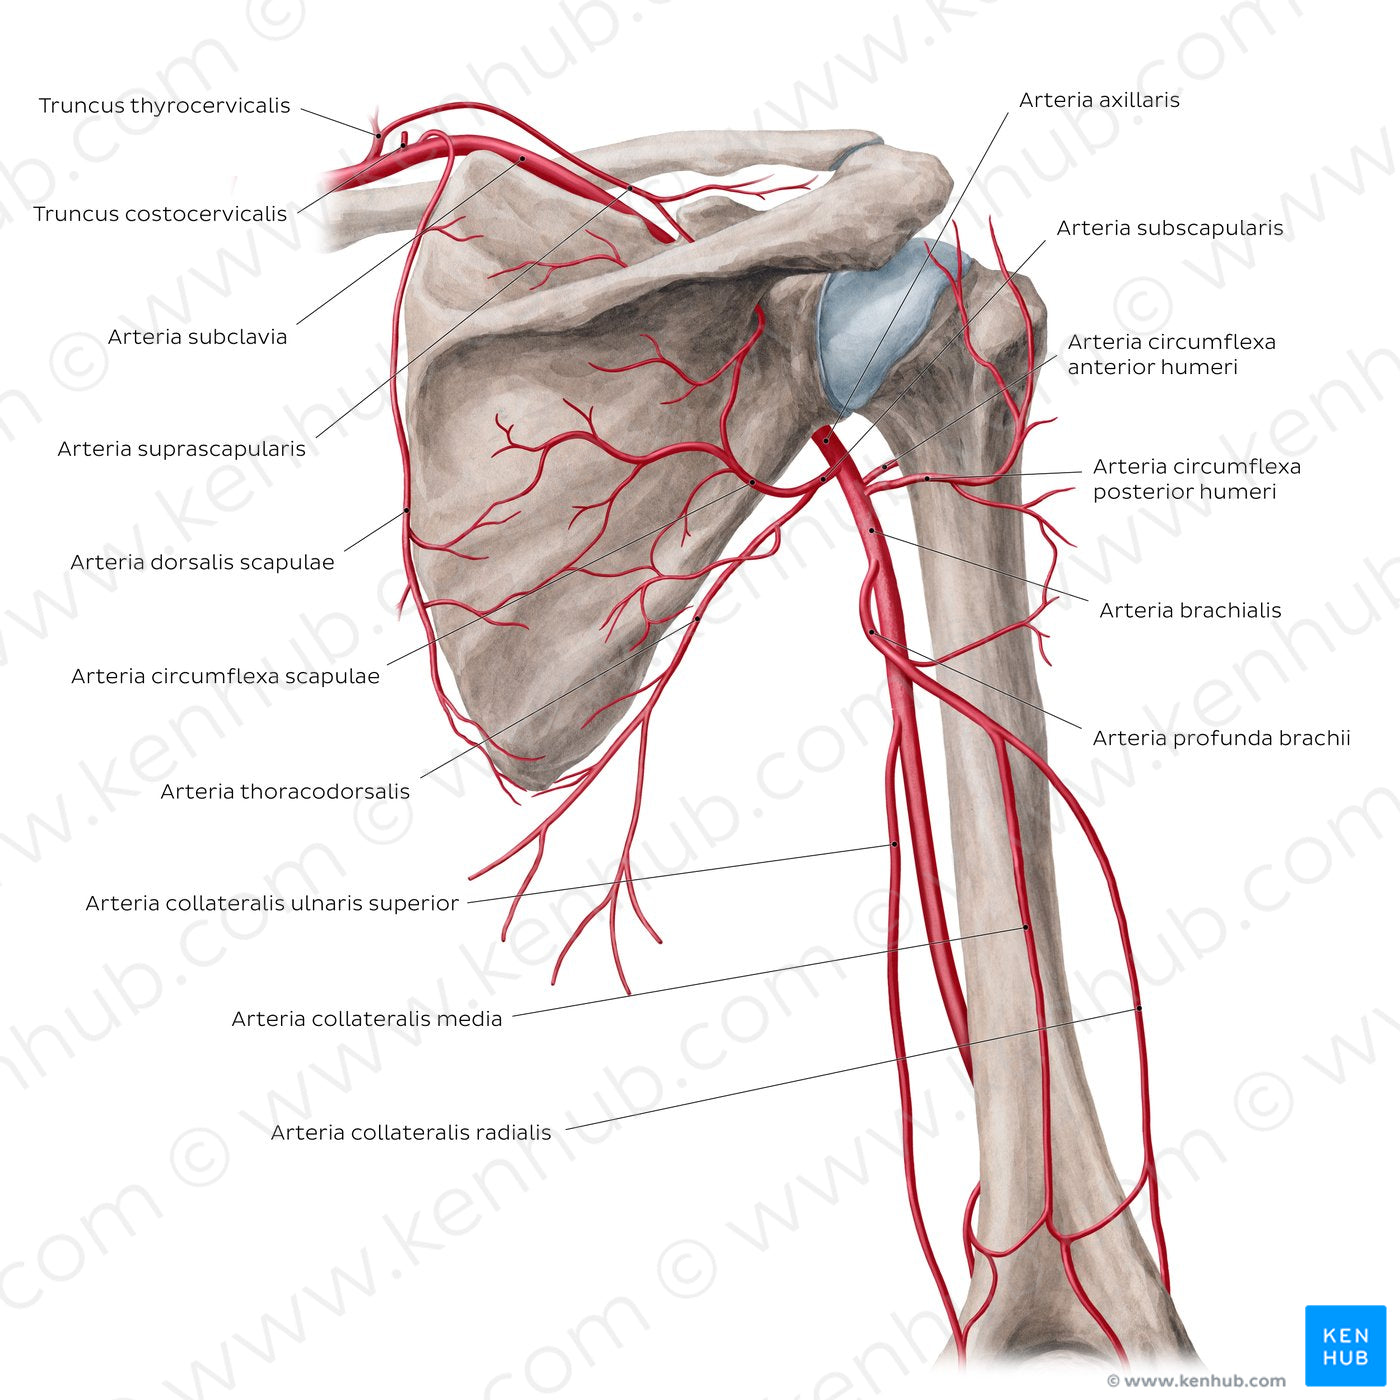 Arteries of the arm and the shoulder - Posterior view (Latin)